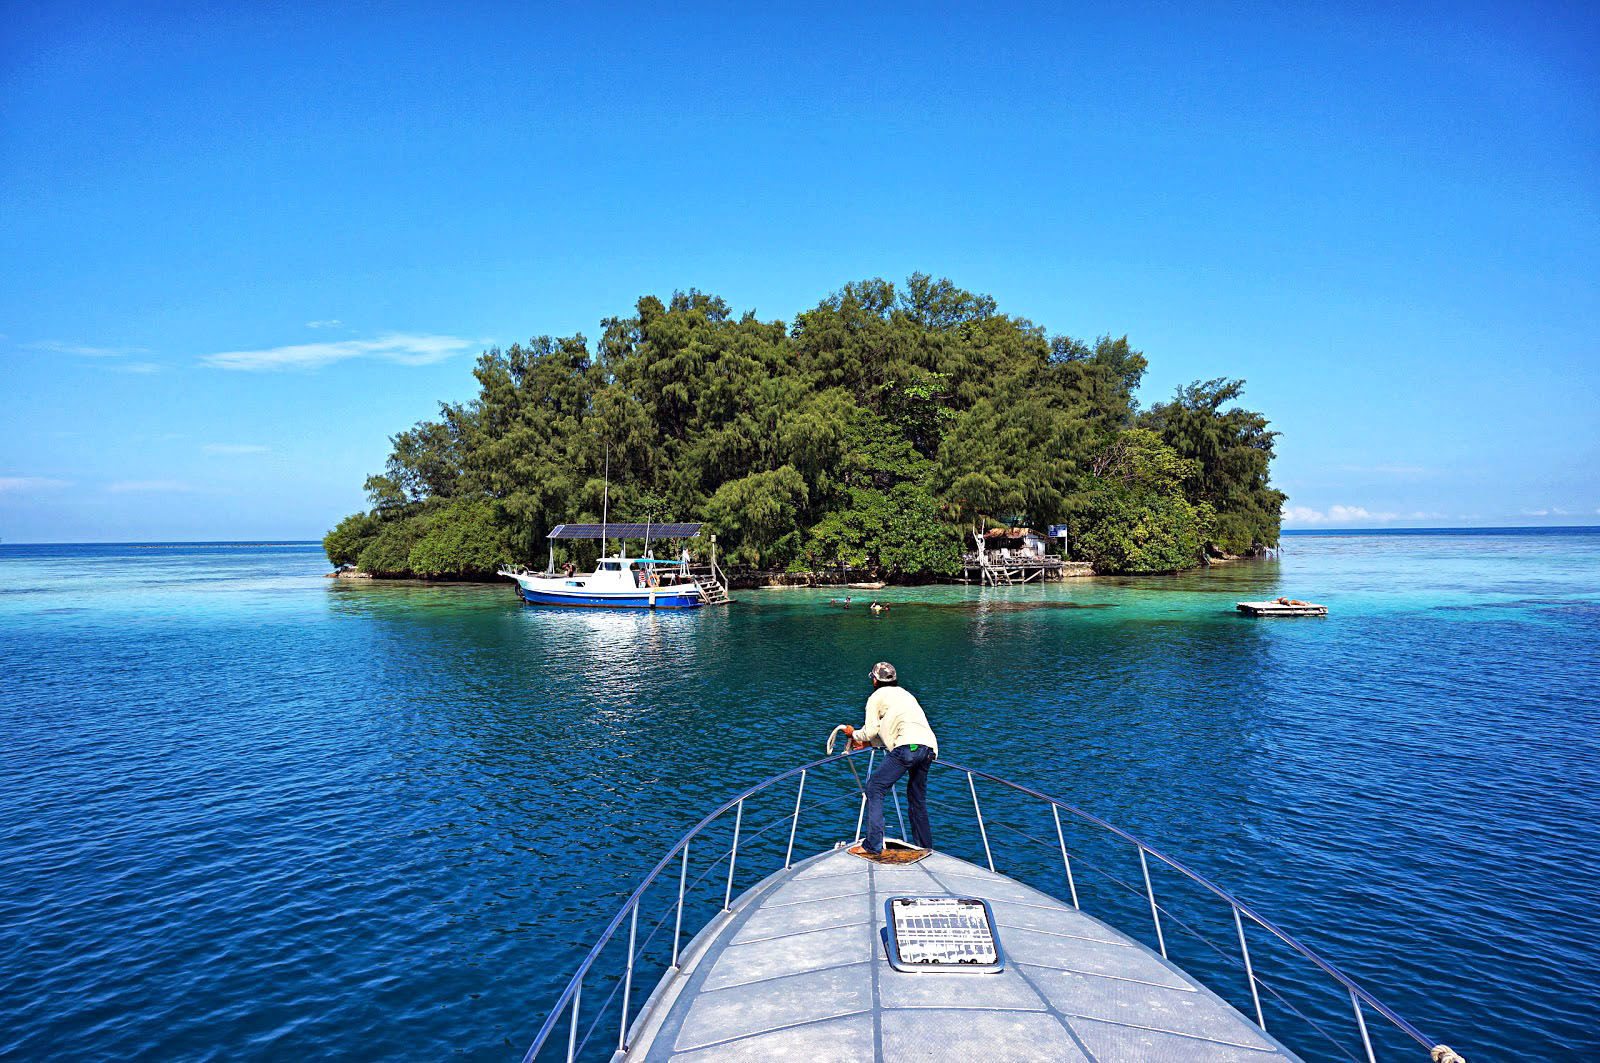 Enjoy the Beauty of the Pulau Seribu, Exciting and Fun !